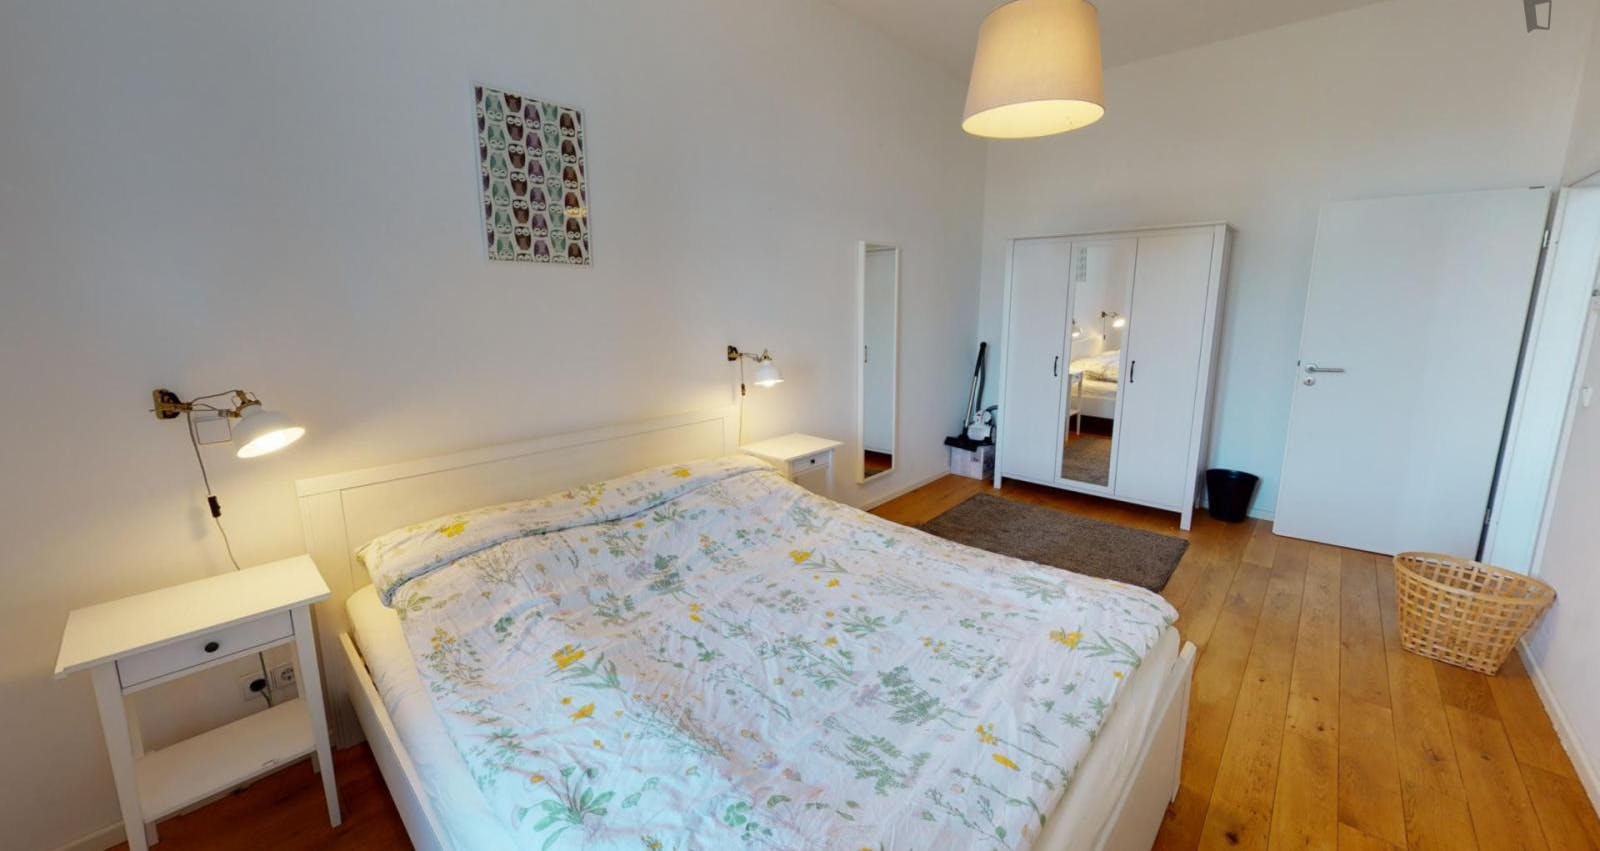 Lovely 1-Bedroom apartment with balcony close to Landsberger Allee train station